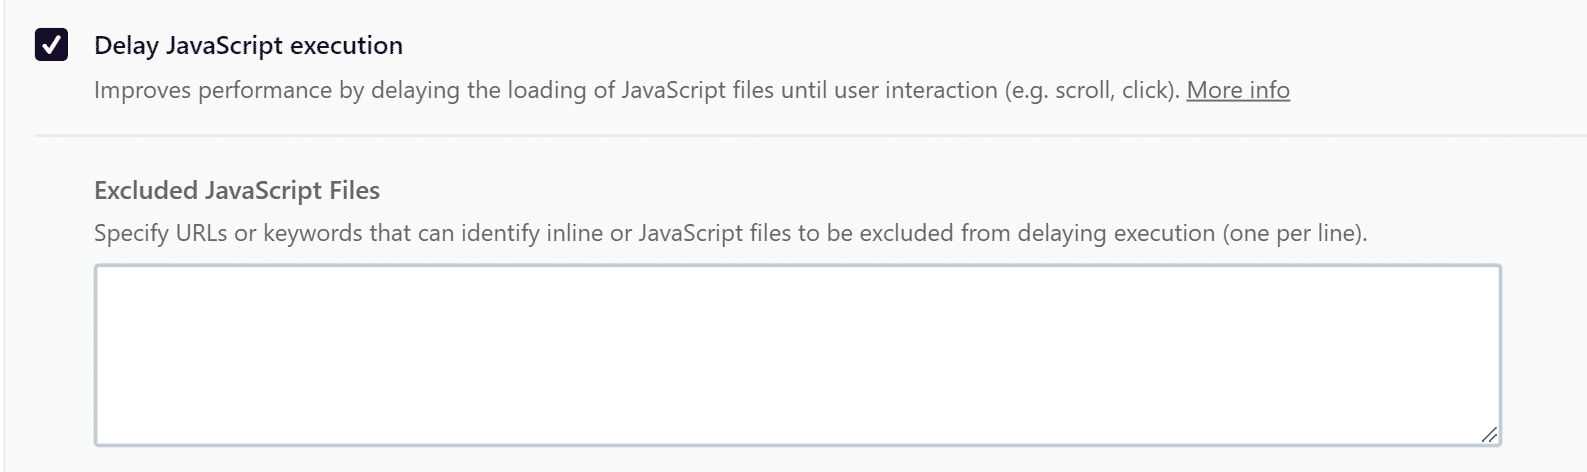 Delay JavaScript execution feature in WP Rocket 3.9